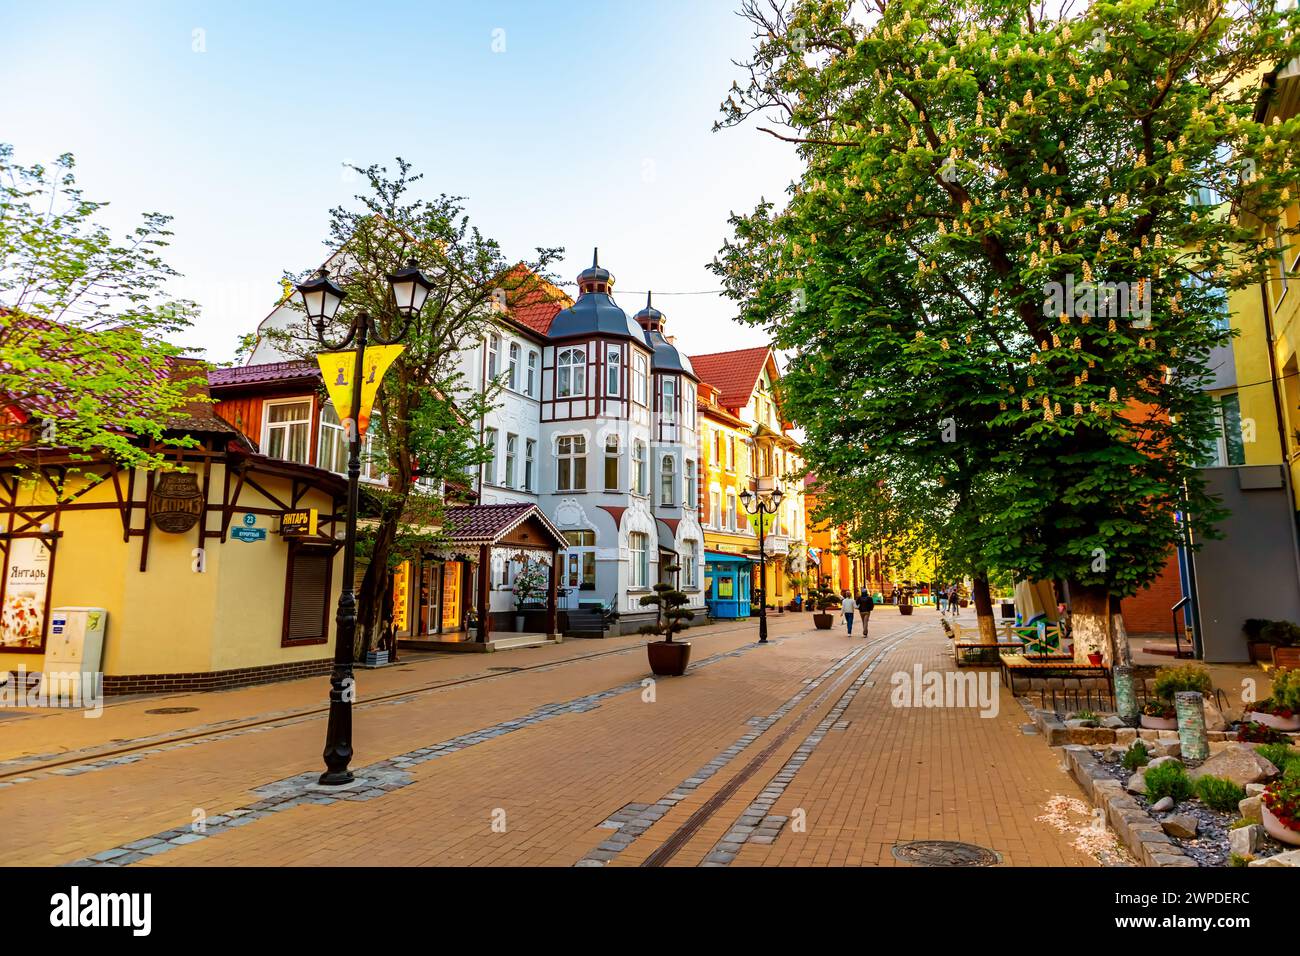 Zelenogradsk, the former German resort town of Kranz. A cozy town on the shores of the Baltic Sea. Kaliningrad region, Zelenogradsk, Russia - May 26, Stock Photo